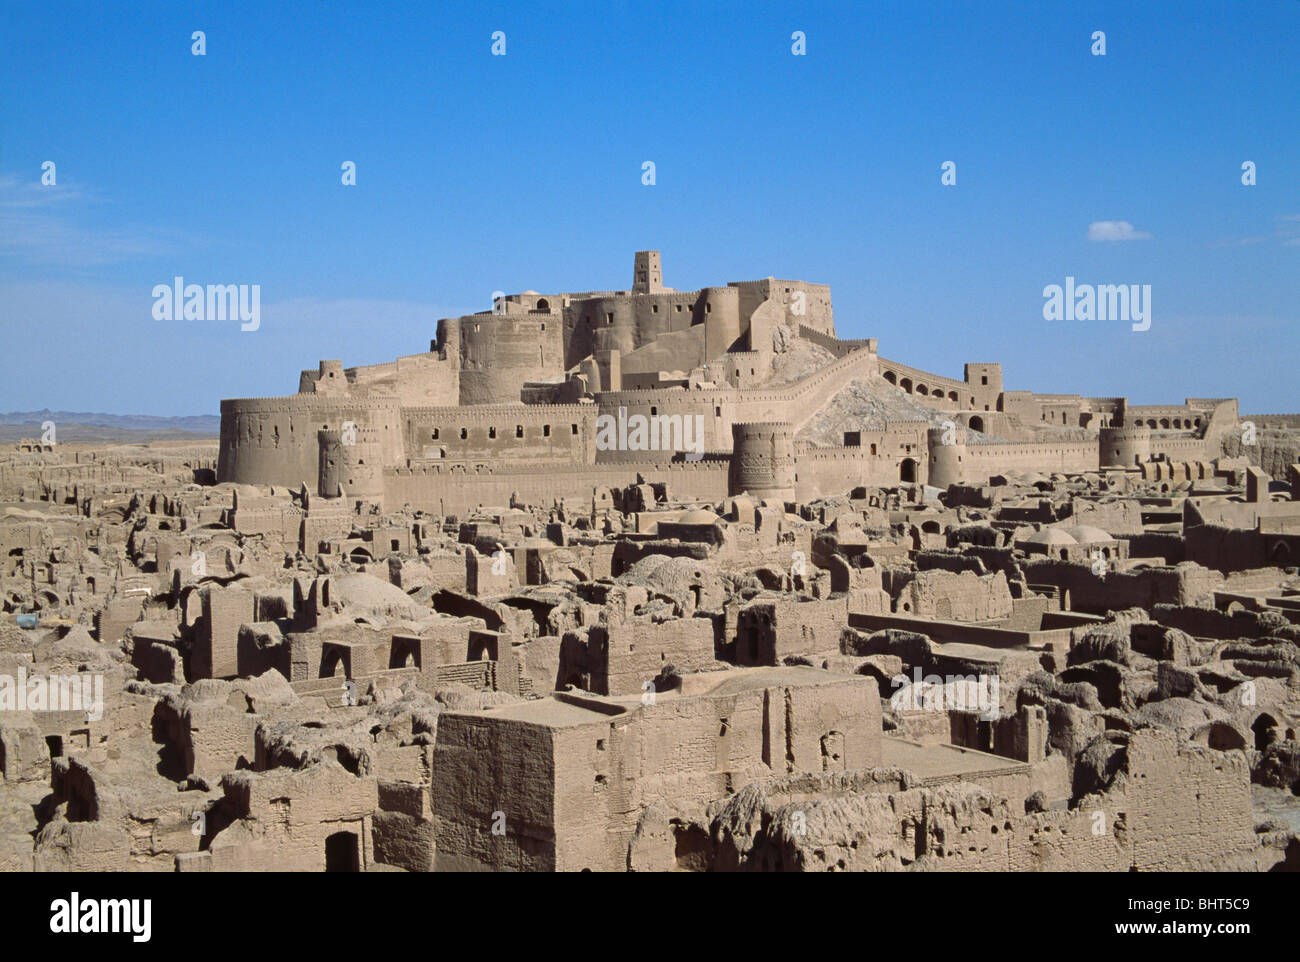 Overview of ruined citadel of Arg-e-Bam, Iran Stock Photo